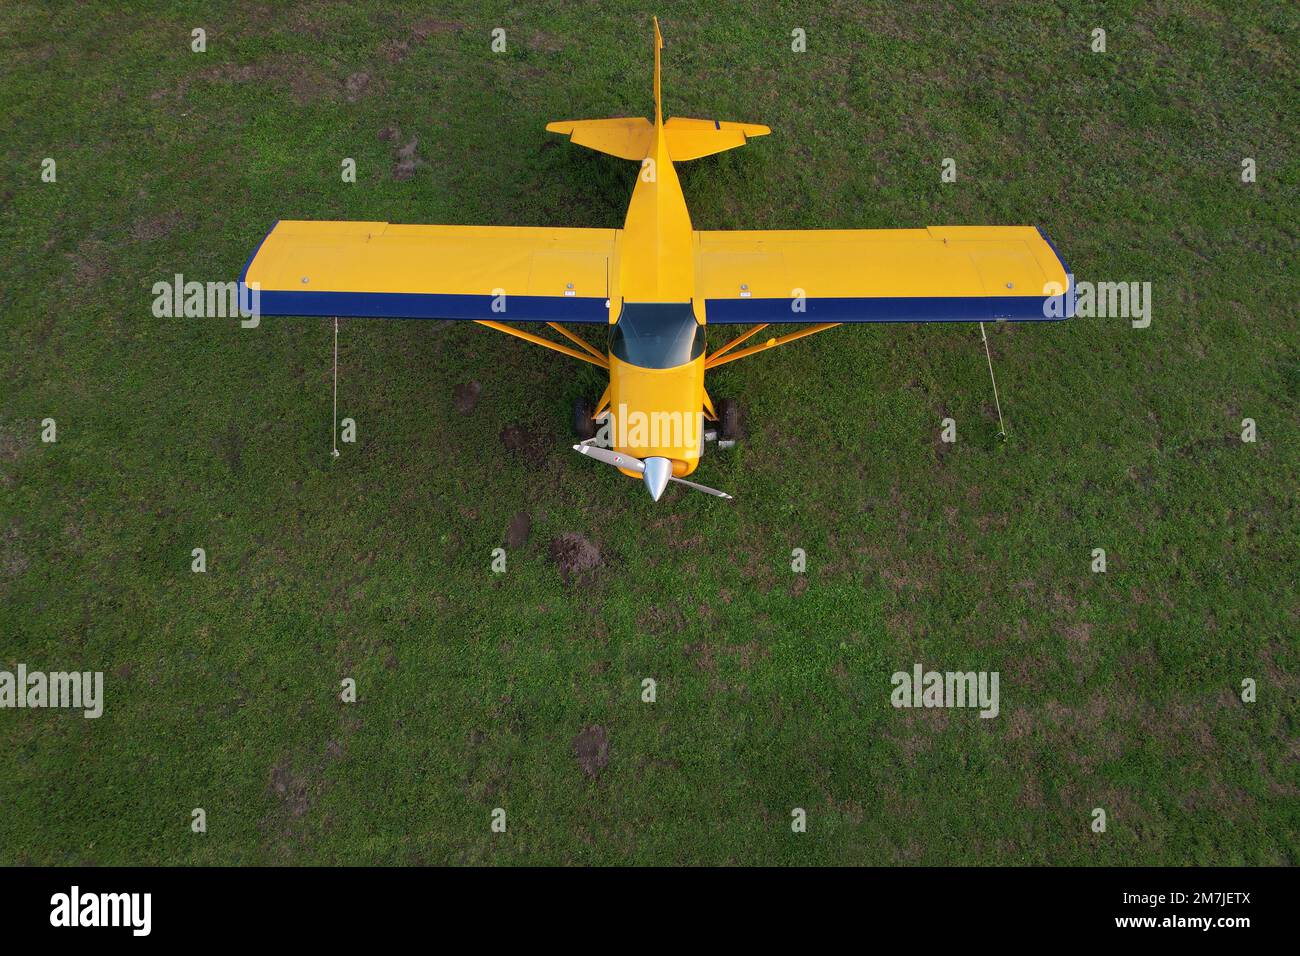 small yellow plane used for short trips seen from above parked on a green field Stock Photo